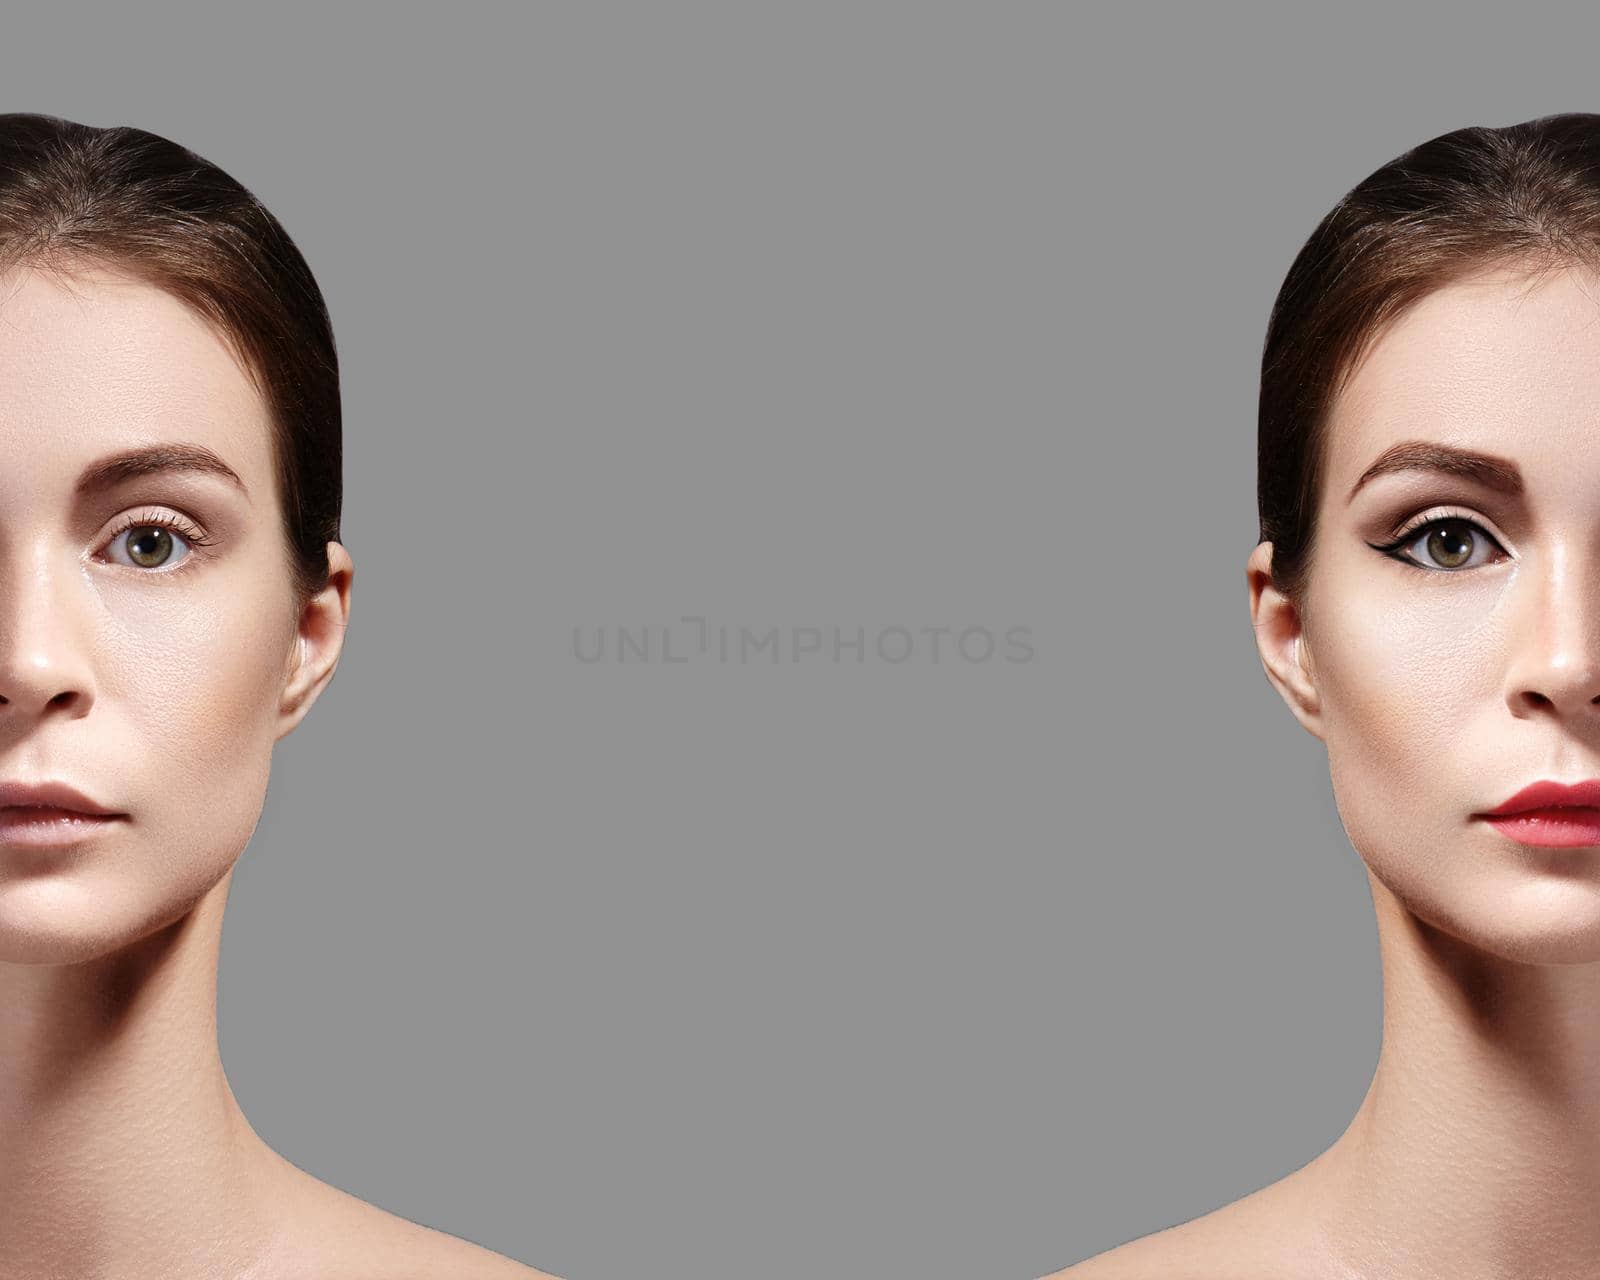 Beautiful Young Woman Before and After Makeup. Comparison Portrait of Two Parts of Face. Girl with and without Make-up by MarinaFrost